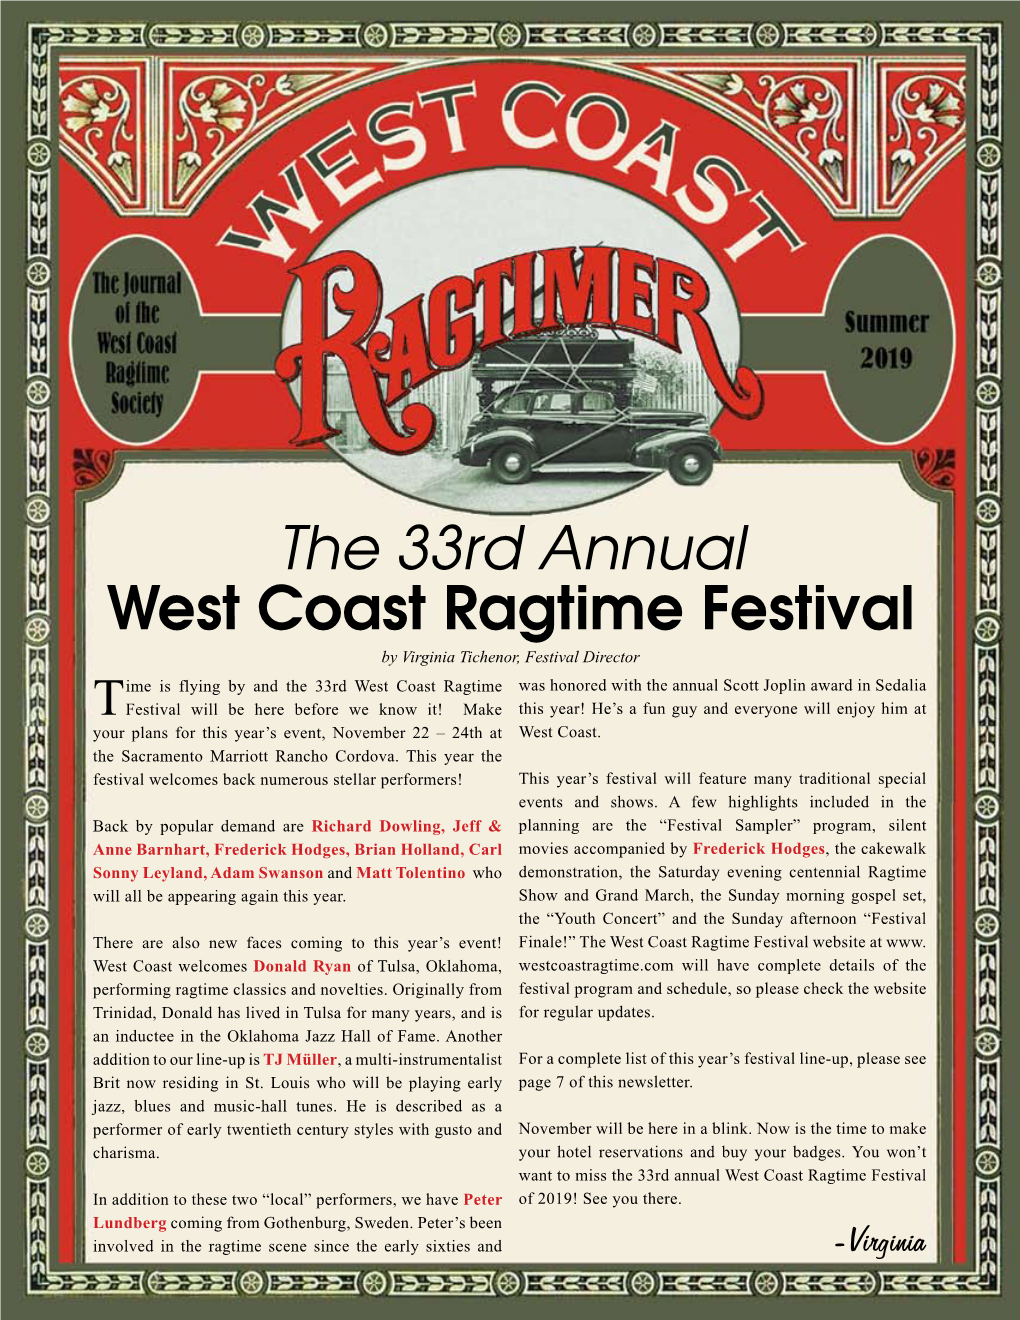 The 33Rd Annual West Coast Ragtime Festival